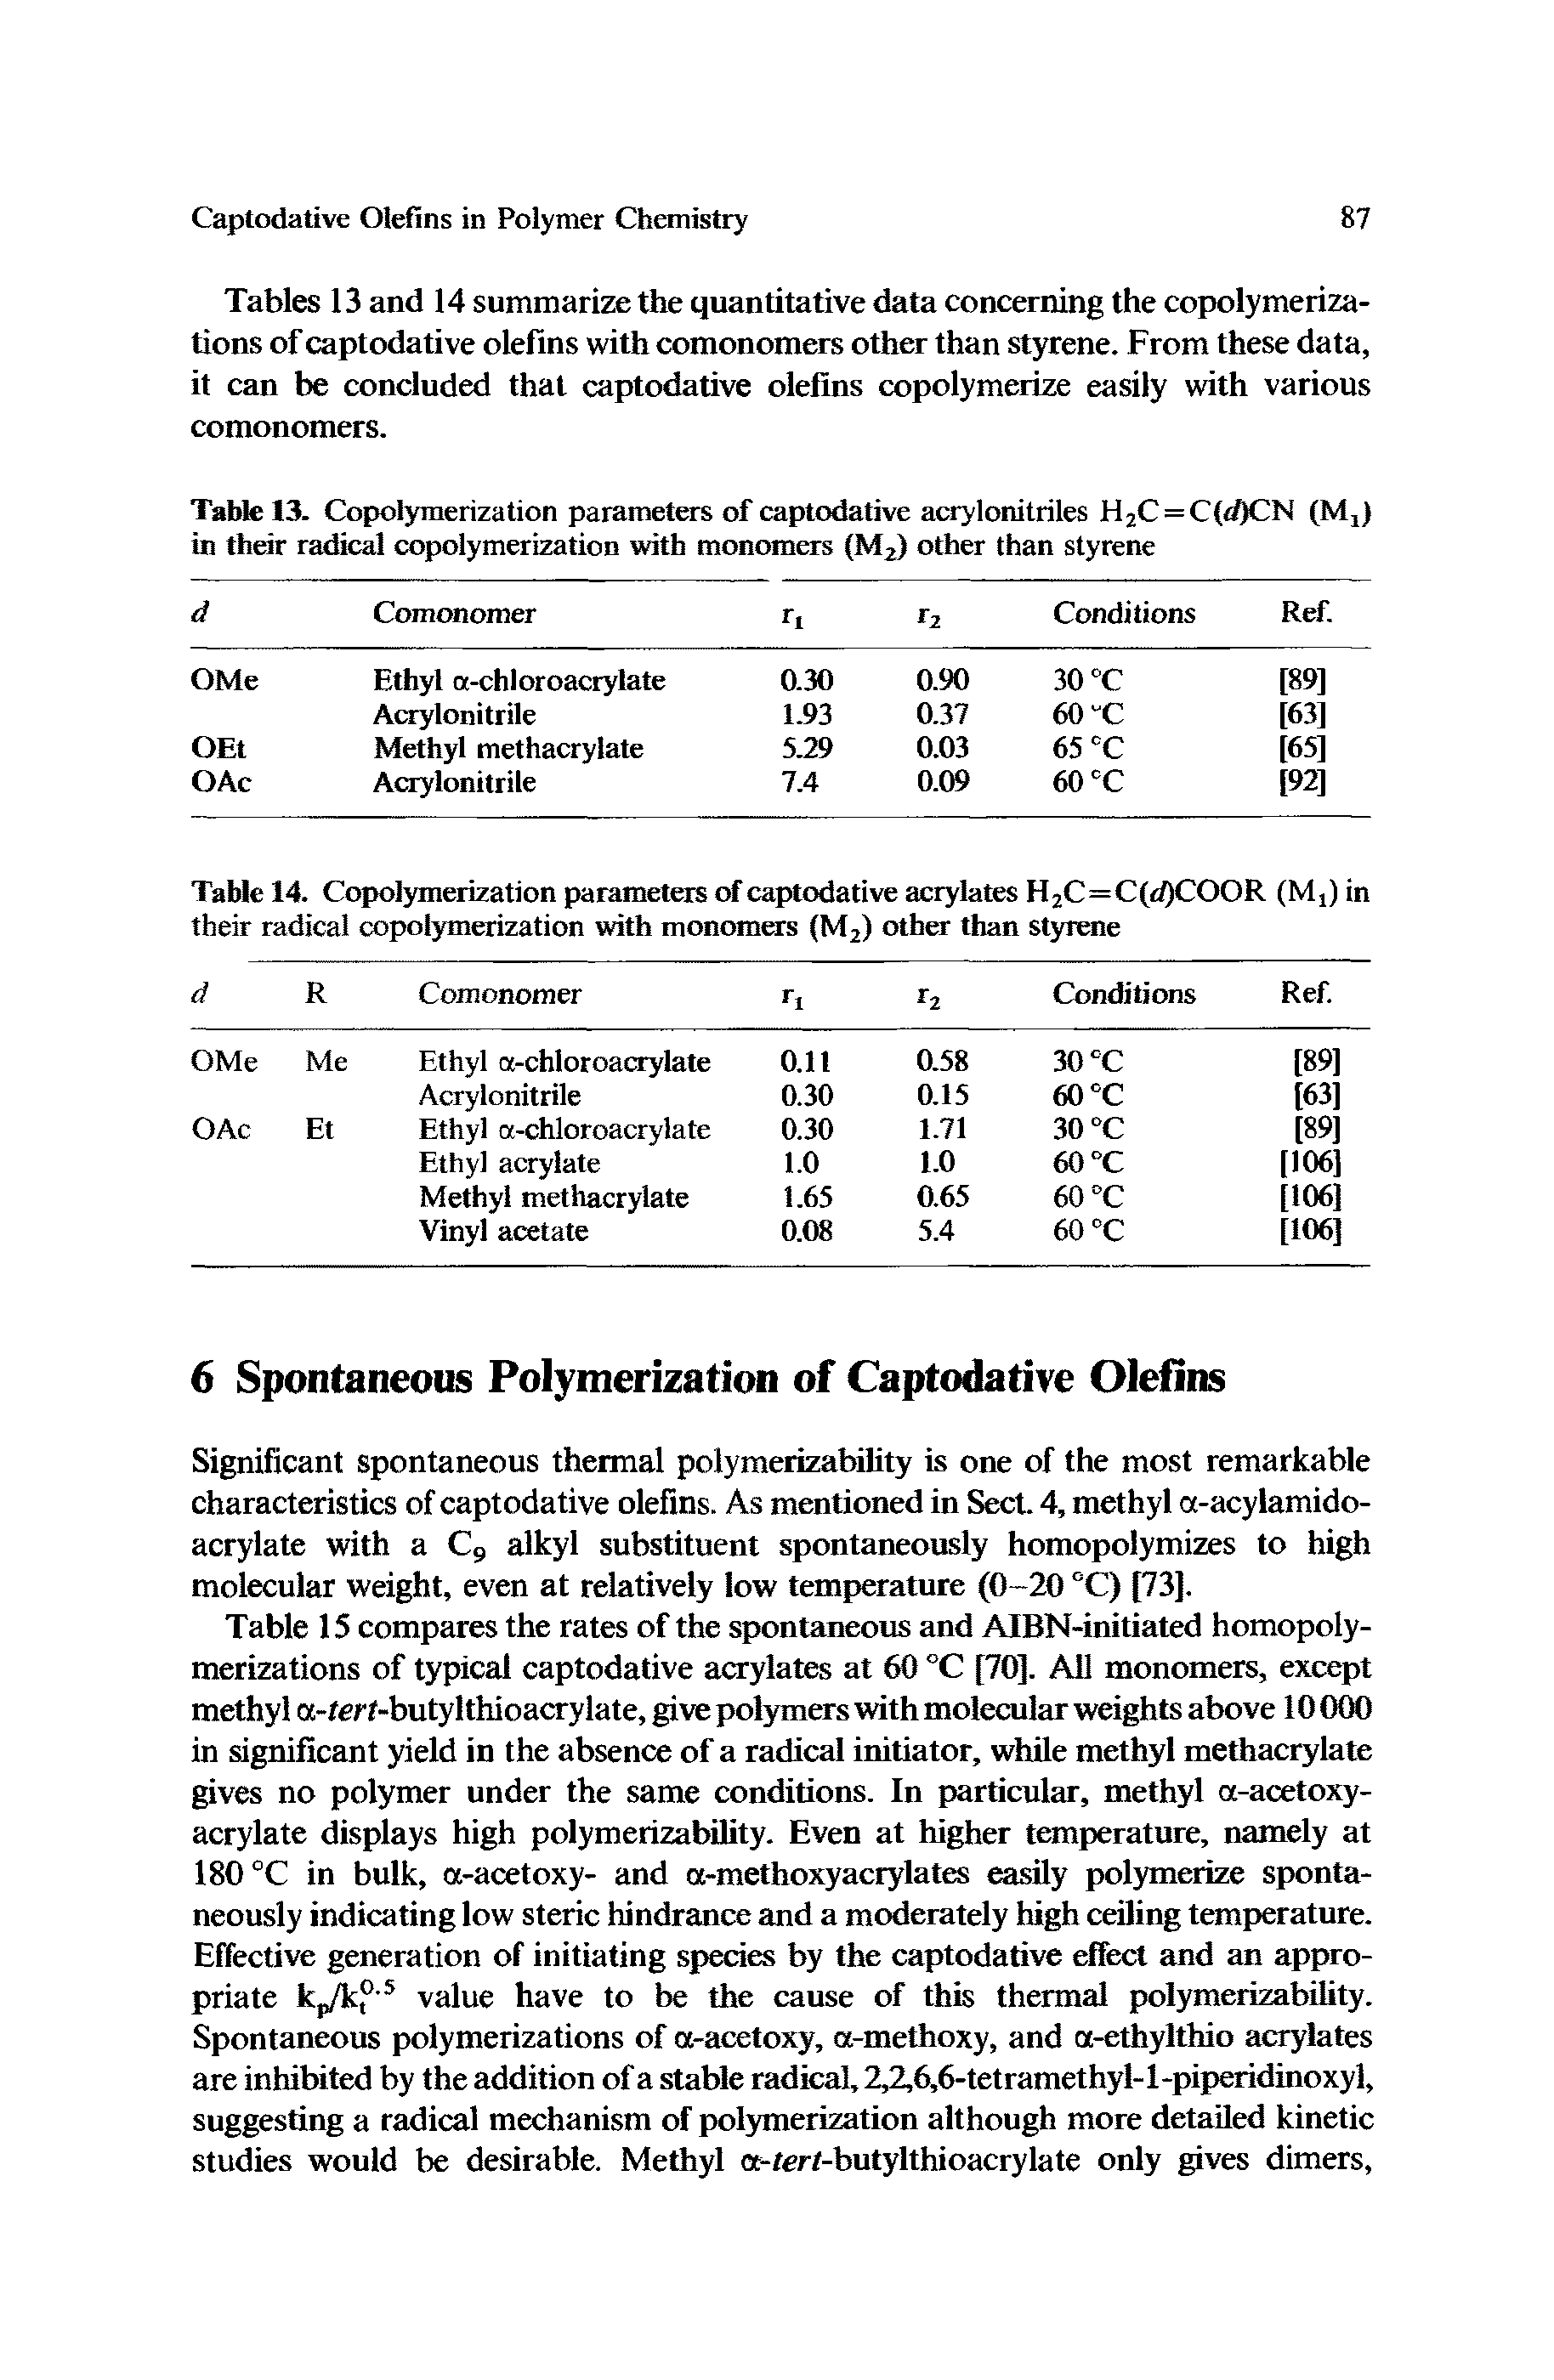 Tables 13 and 14 summarize the quantitative data concerning the copolymerizations of captodative olefins with comonomers other than styrene. From these data, it can be concluded that captodative olefins copolymerize easily with various comonomers.